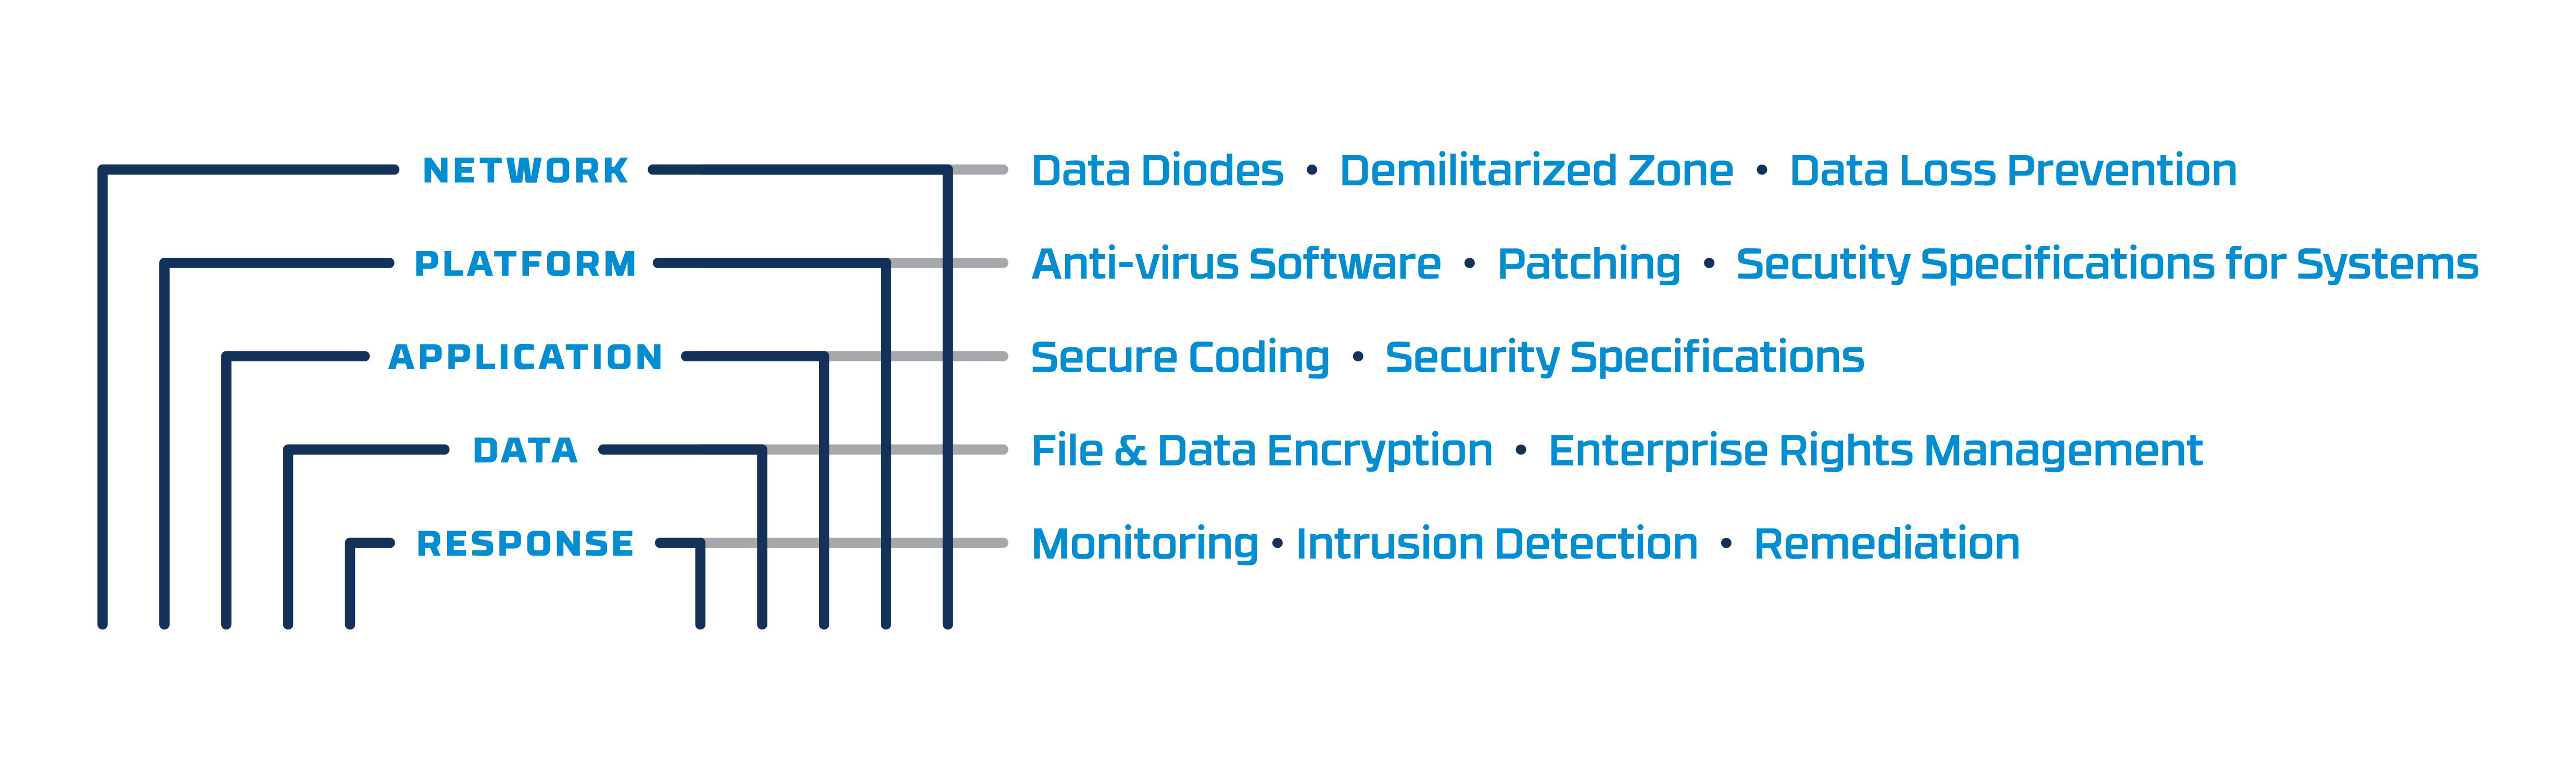 learn-about-cross-domain-solutions-owl-cyber-defense